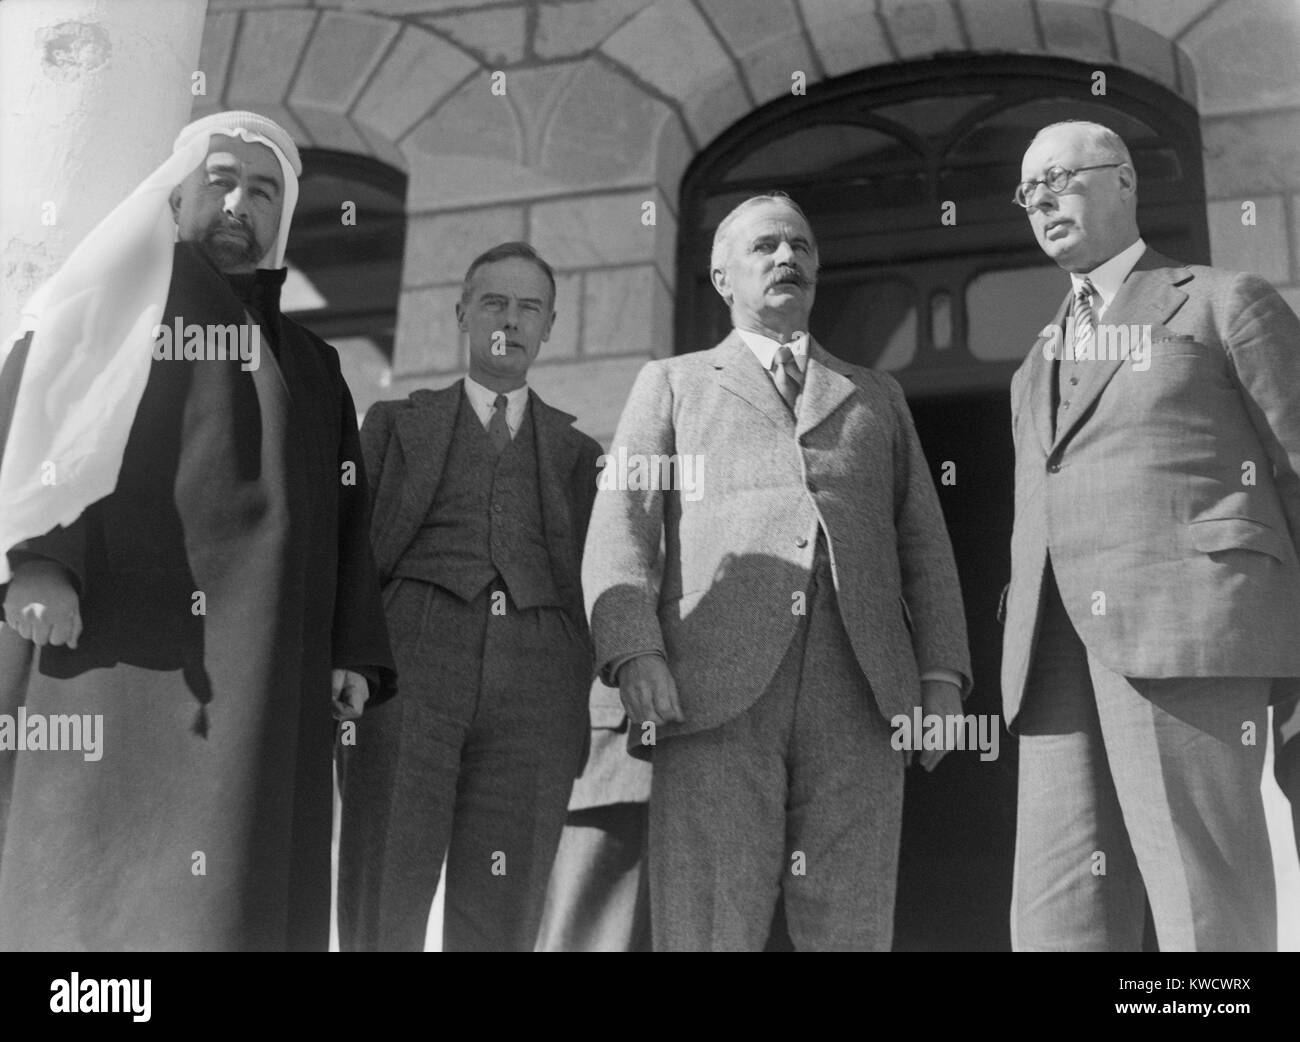 Emir Abdullah, leader of British Mandatory Jordan receives Members of the Peel Commission. On Jan. 11, 1937, they conferenced with him on their conclusion that Palestine be partitioned into Jewish and Arab zones. The proposed Arab zone bordered on Jordan (BSLOC 2017 1 205) Stock Photo